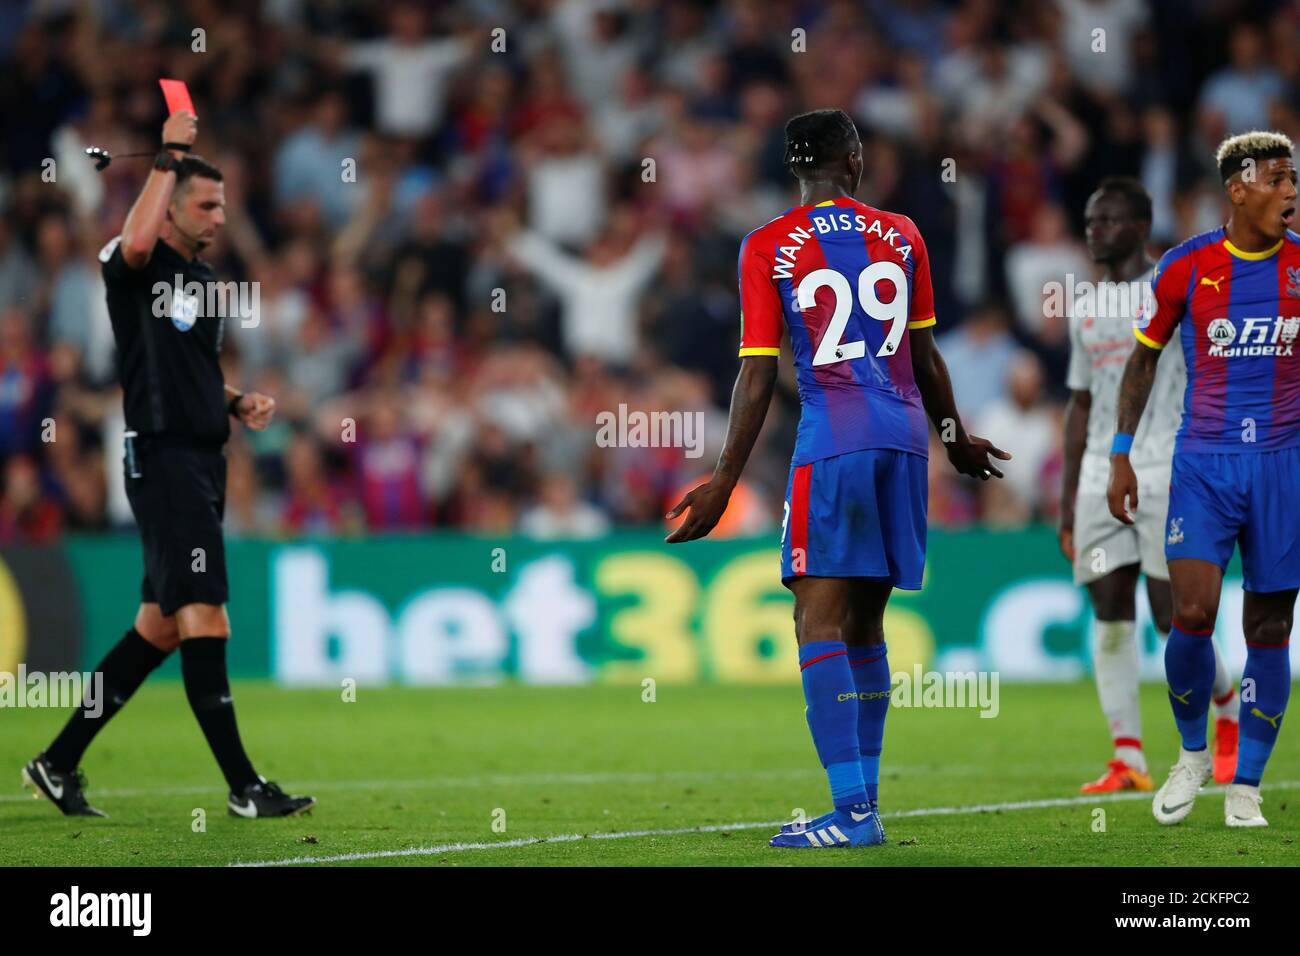 Soccer Football - Premier League - Crystal Palace v Liverpool - Selhurst Park, London, Britain - August 20, 2018  Crystal Palace's Aaron Wan-Bissaka is shown a red card by the referee after conceding a foul against Liverpool's Mohamed Salah (not pictured)                        REUTERS/Eddie Keogh  EDITORIAL USE ONLY. No use with unauthorized audio, video, data, fixture lists, club/league logos or 'live' services. Online in-match use limited to 75 images, no video emulation. No use in betting, games or single club/league/player publications.  Please contact your account representative for furt Stock Photo